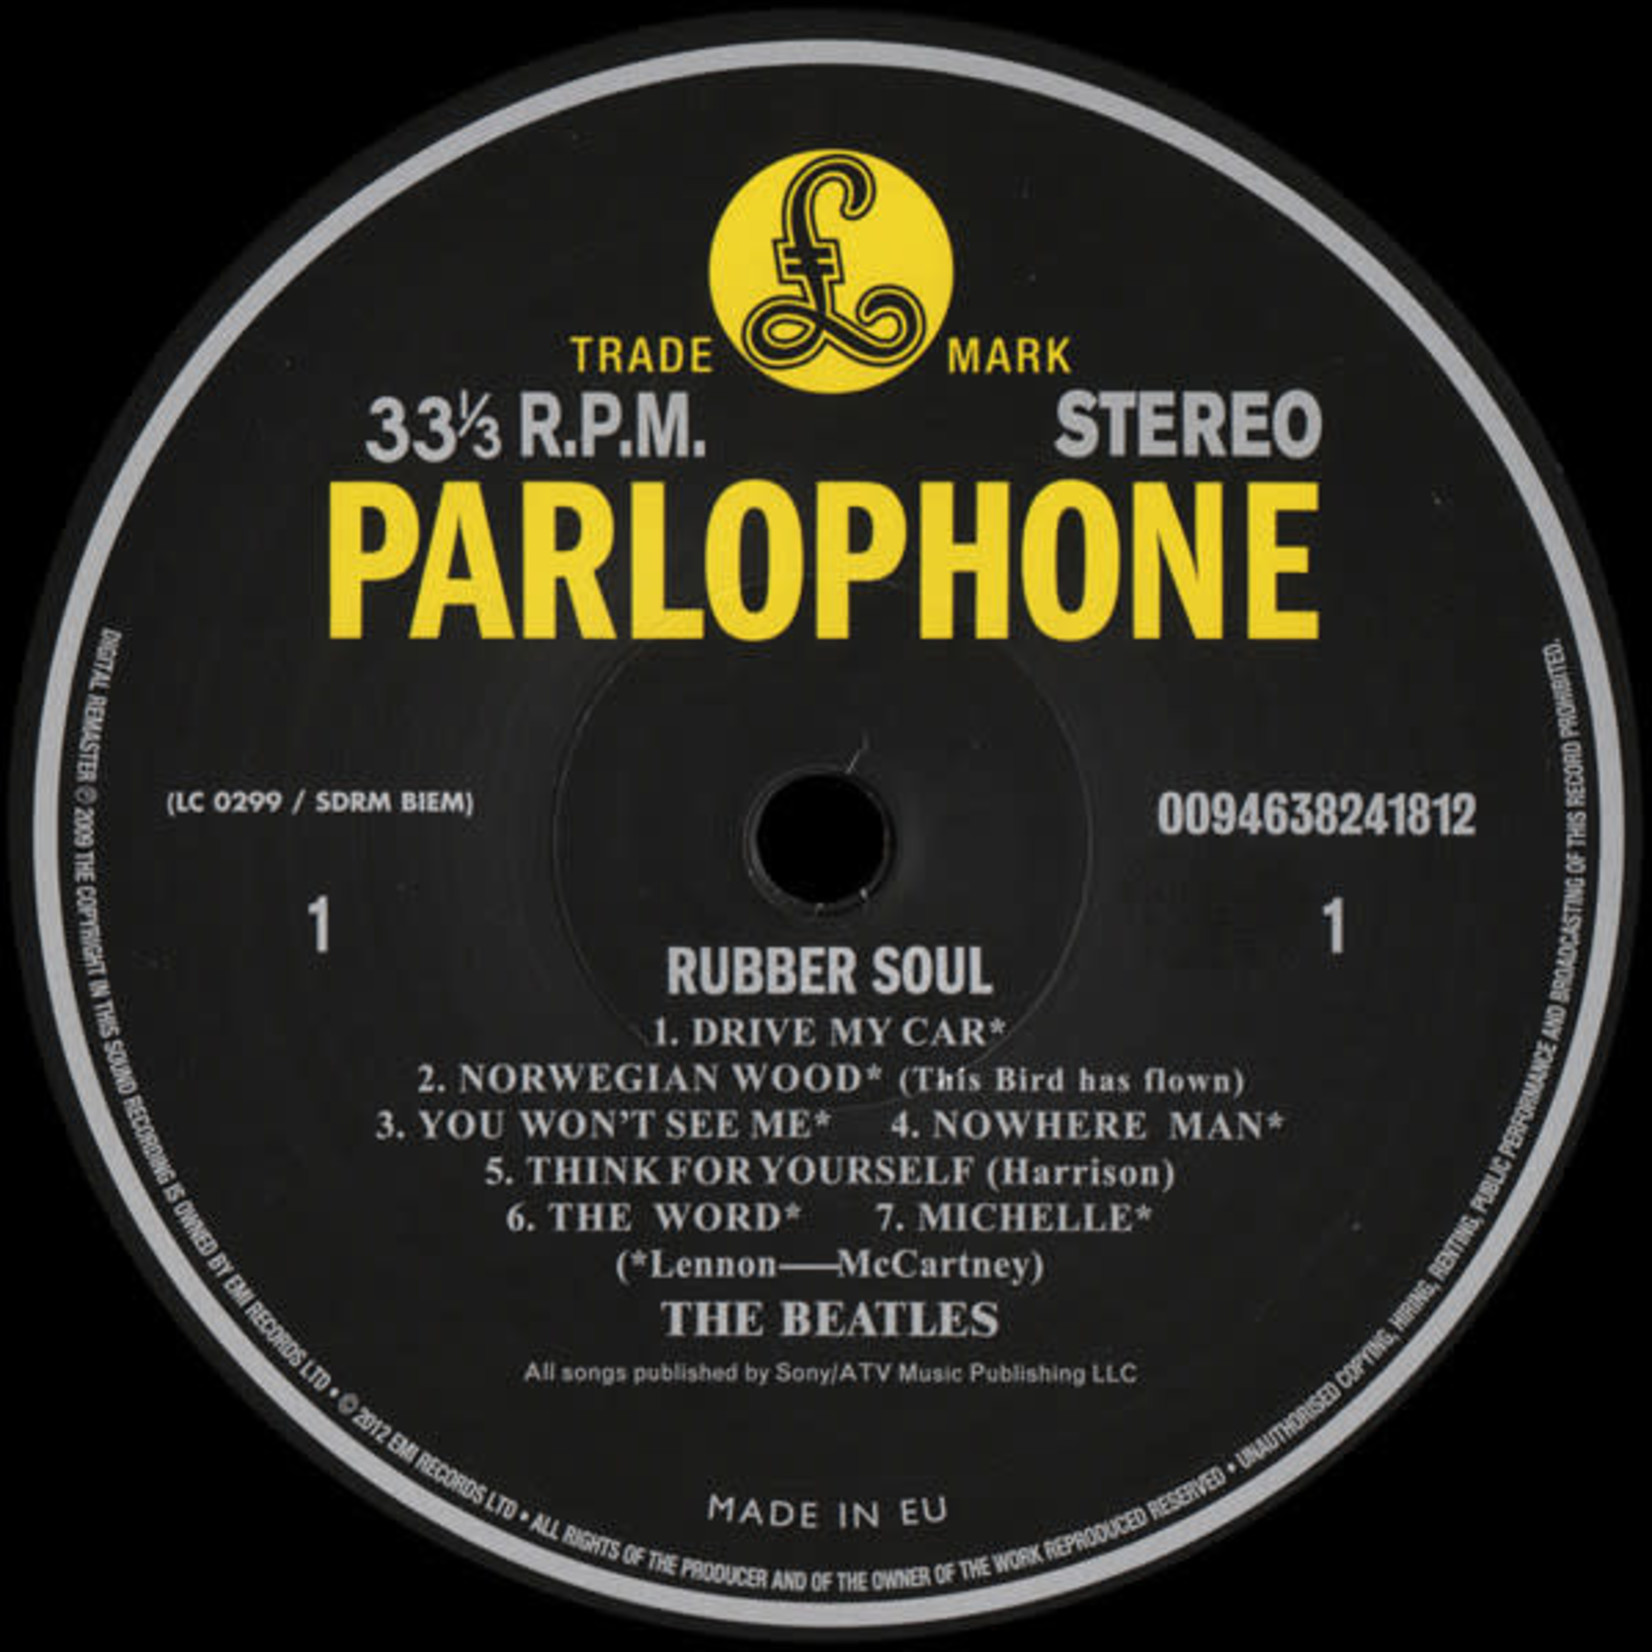 THE BEATLES RUBBER SOUL (STEREO REMASTERED) ARCHTOP VINYL SHOP